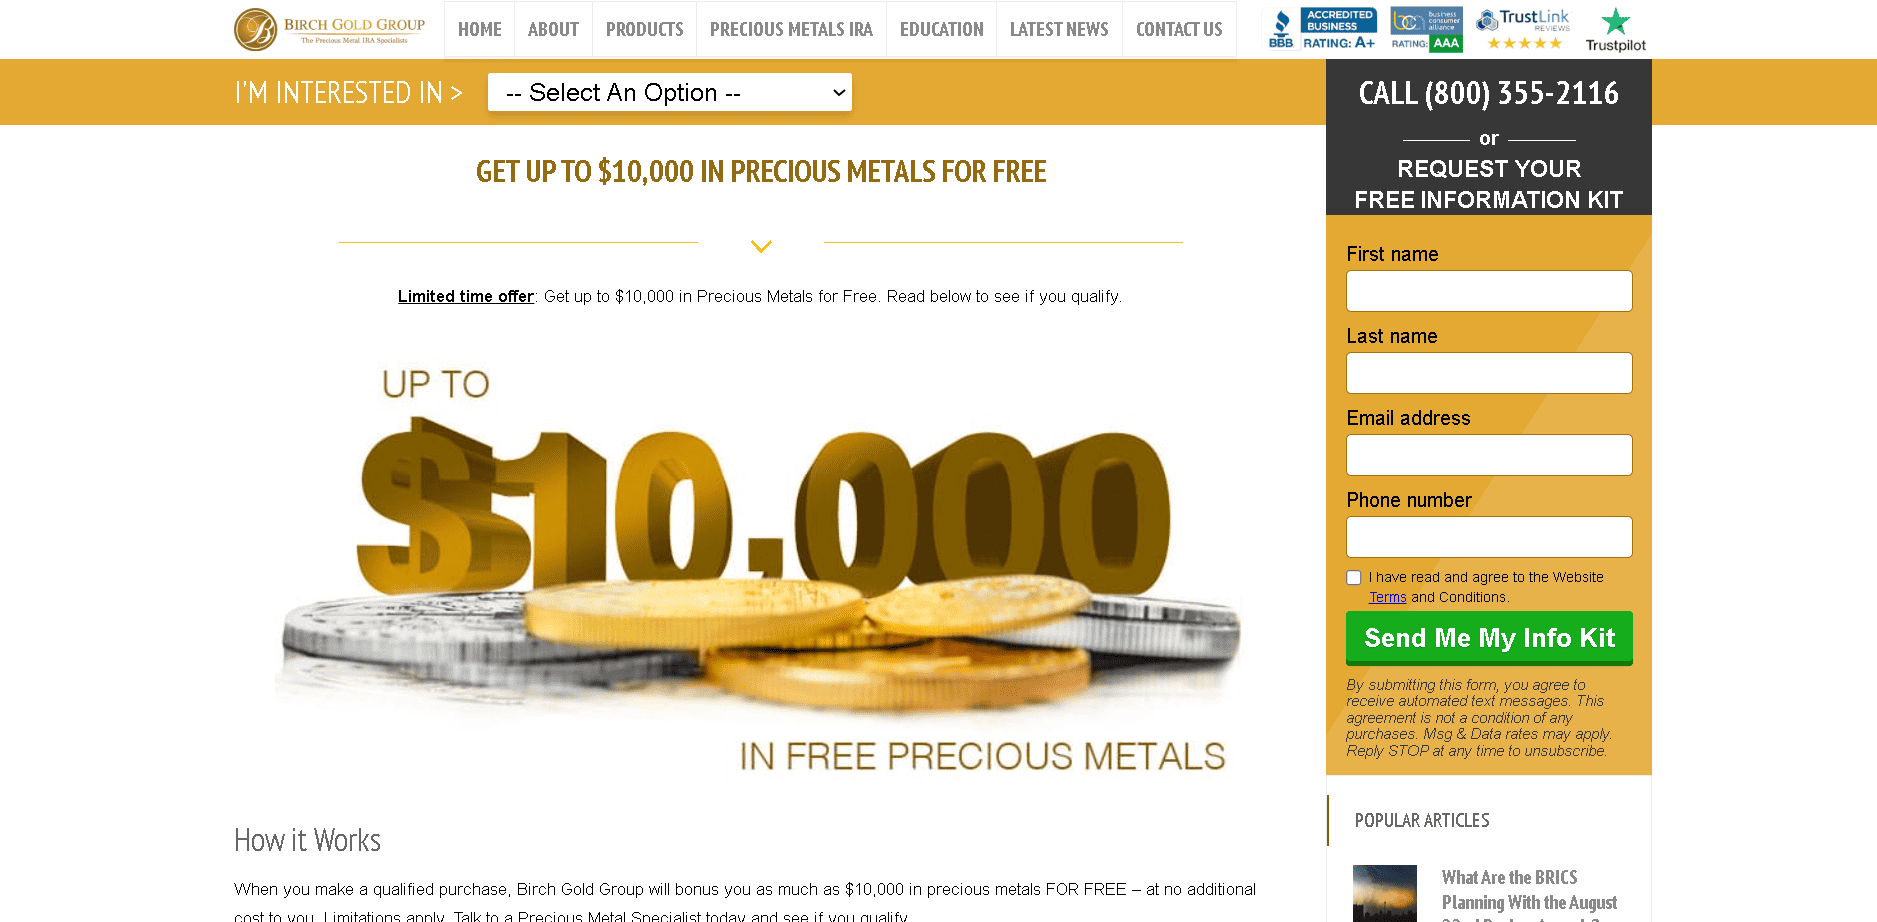 Birch Gold Group offer up to $10 000 in precious metals (coins and bars) for free